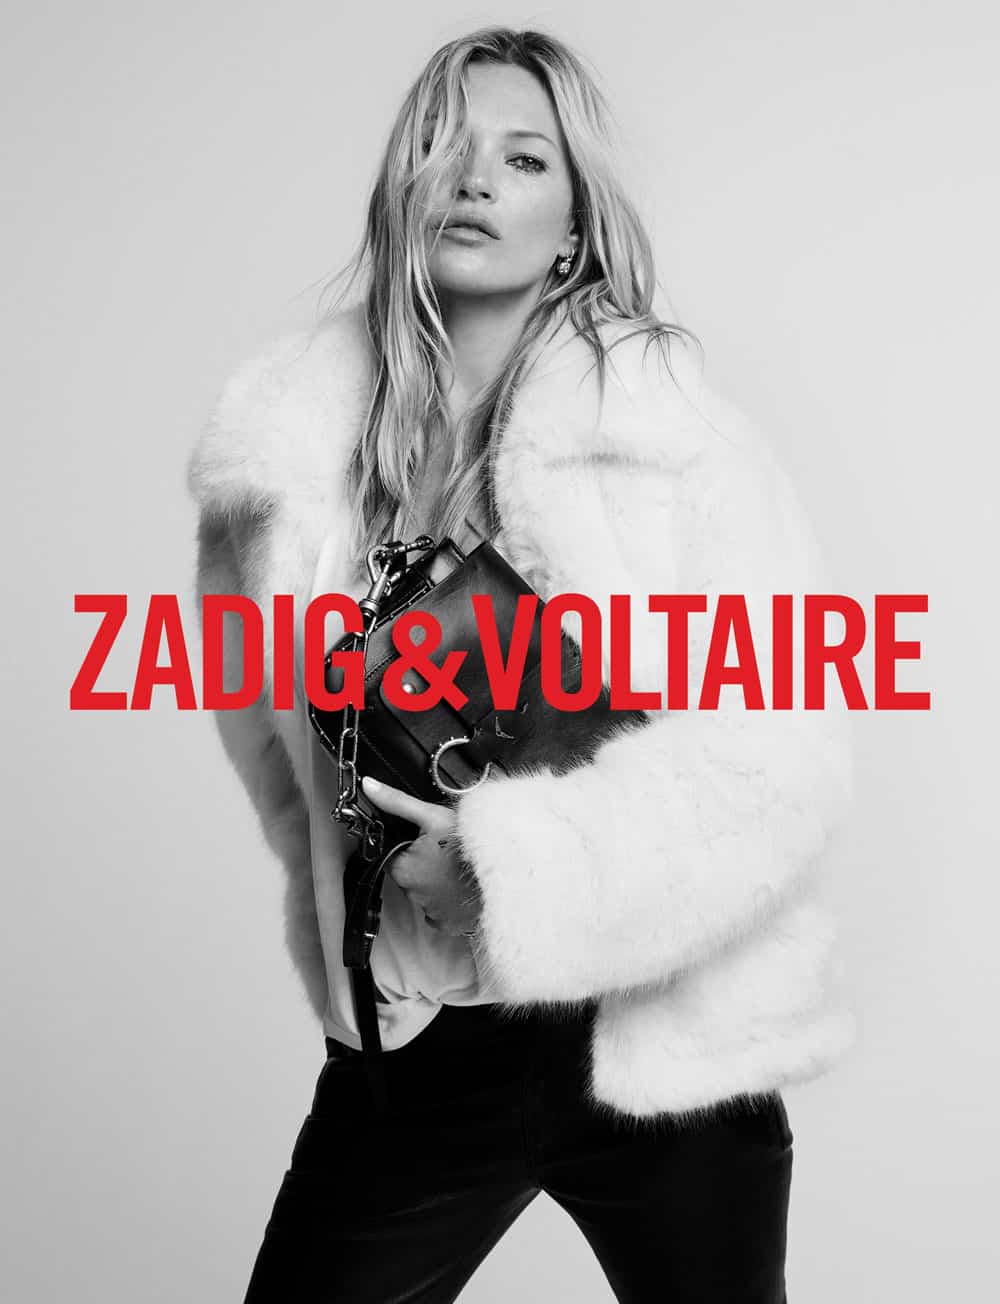 Zadig & Voltaire's Cecilia Bönström's Collaboration with Kate Moss